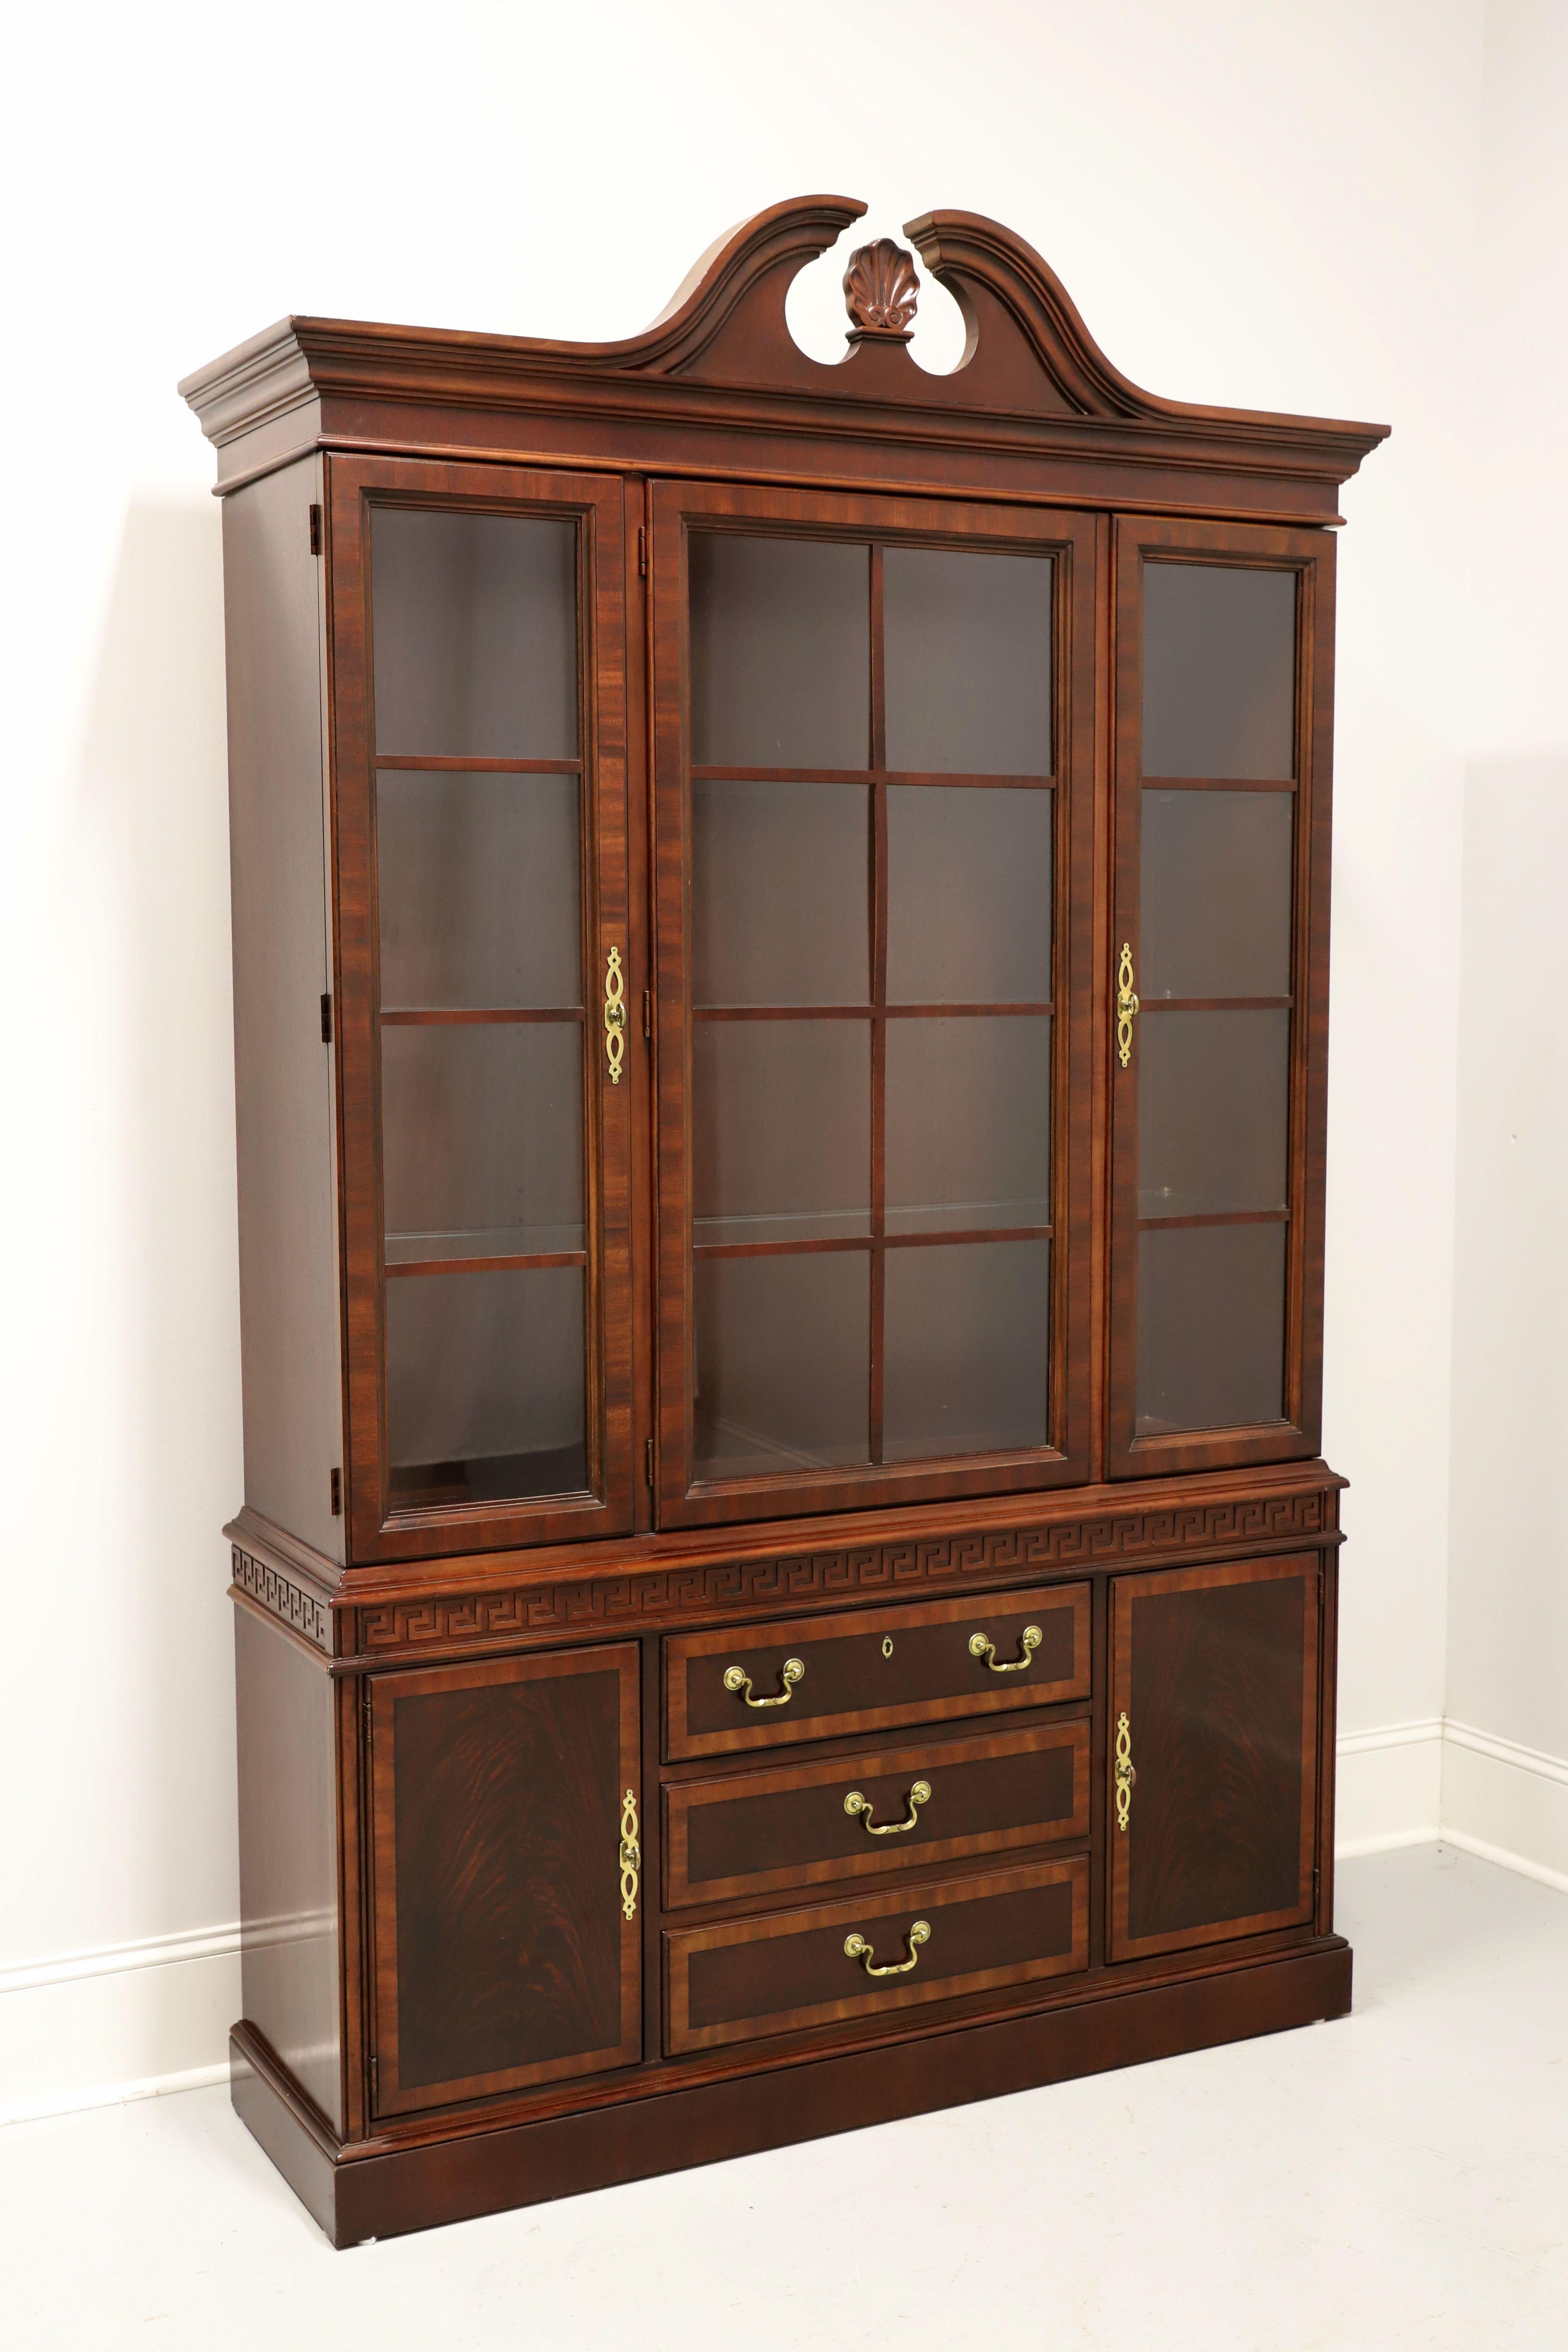 A Chippendale style china cabinet by Drexel Heritage. Mahogany with inlaid flame mahogany, brass hardware, crown moulding with pediment to top, banded door & drawer fronts, decoratively carved frieze to center, and a solid base. Upper lighted